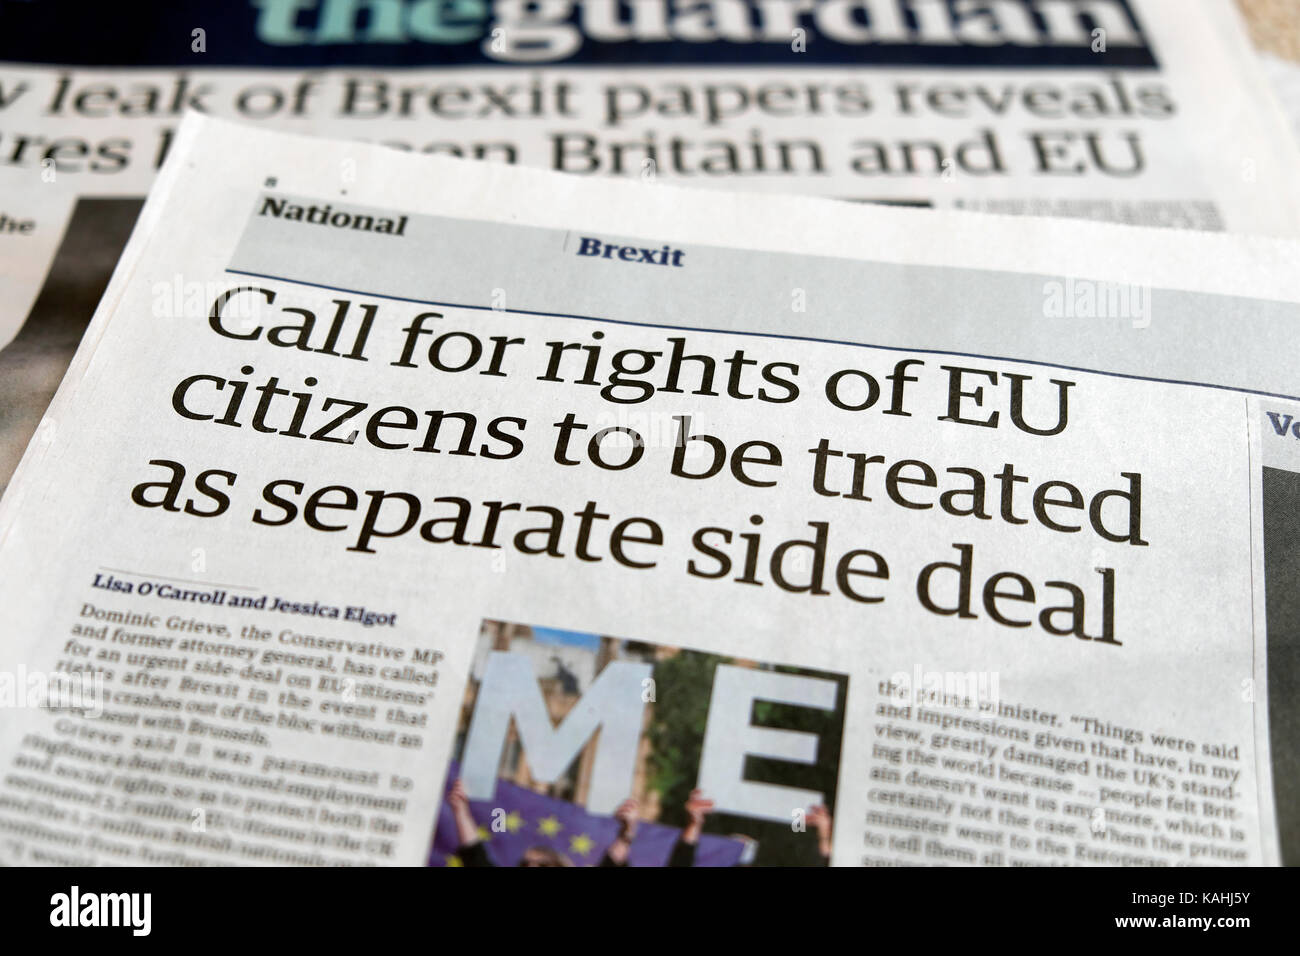 'Call for rights of EU citizens to be treated as separate side deal' Guardian Brexit newspaper article London 2017 Stock Photo